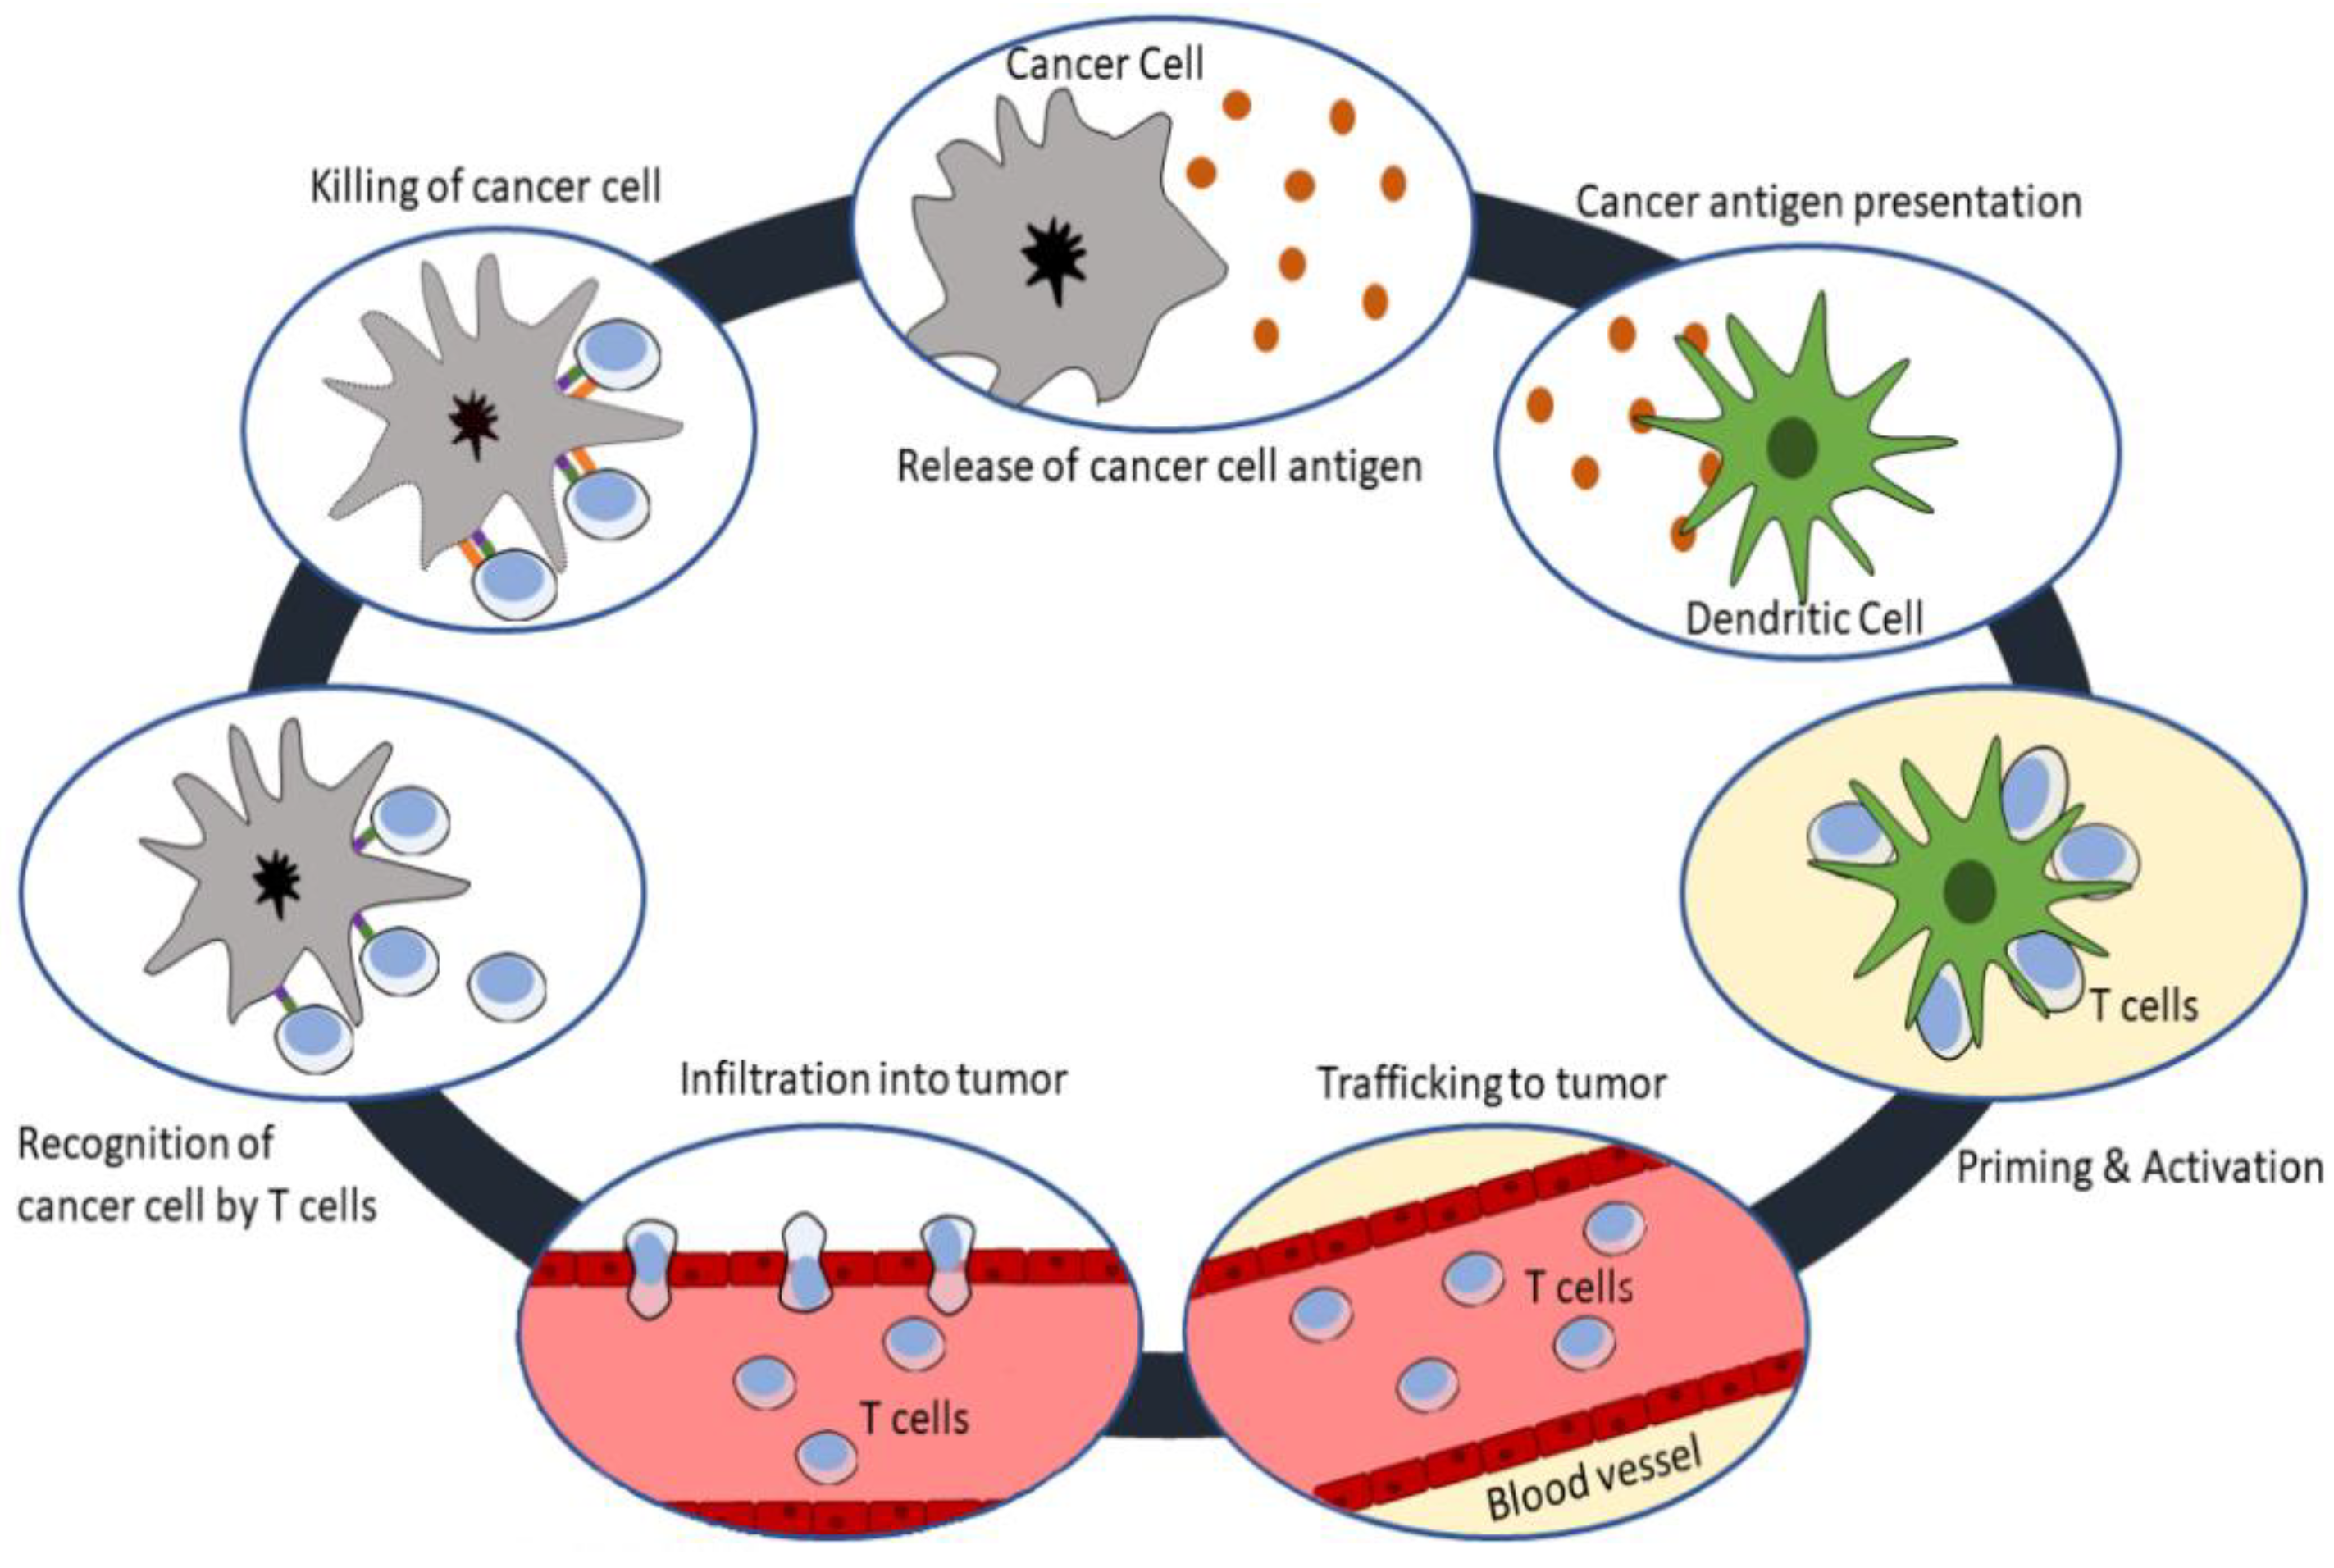 Cancer colon immunotherapy. Cancer Immunology and Immunotherapy